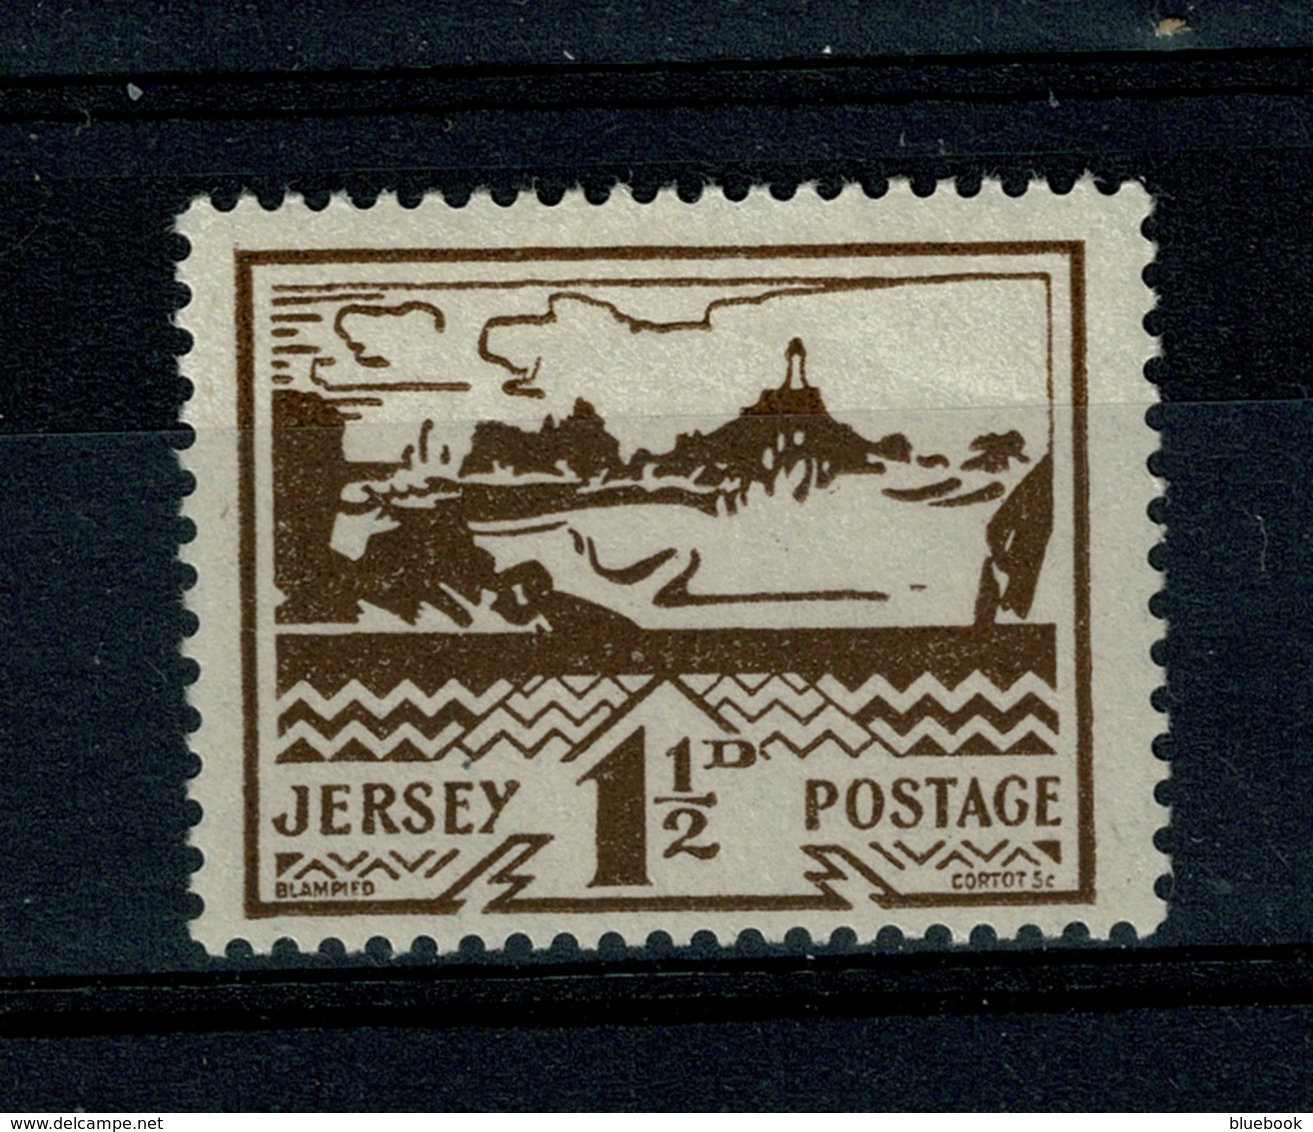 Ref 1354 - WWII Channel Islands - Jersey 1943 SG 5 - 1 1/2d Mint Stamp - Jersey